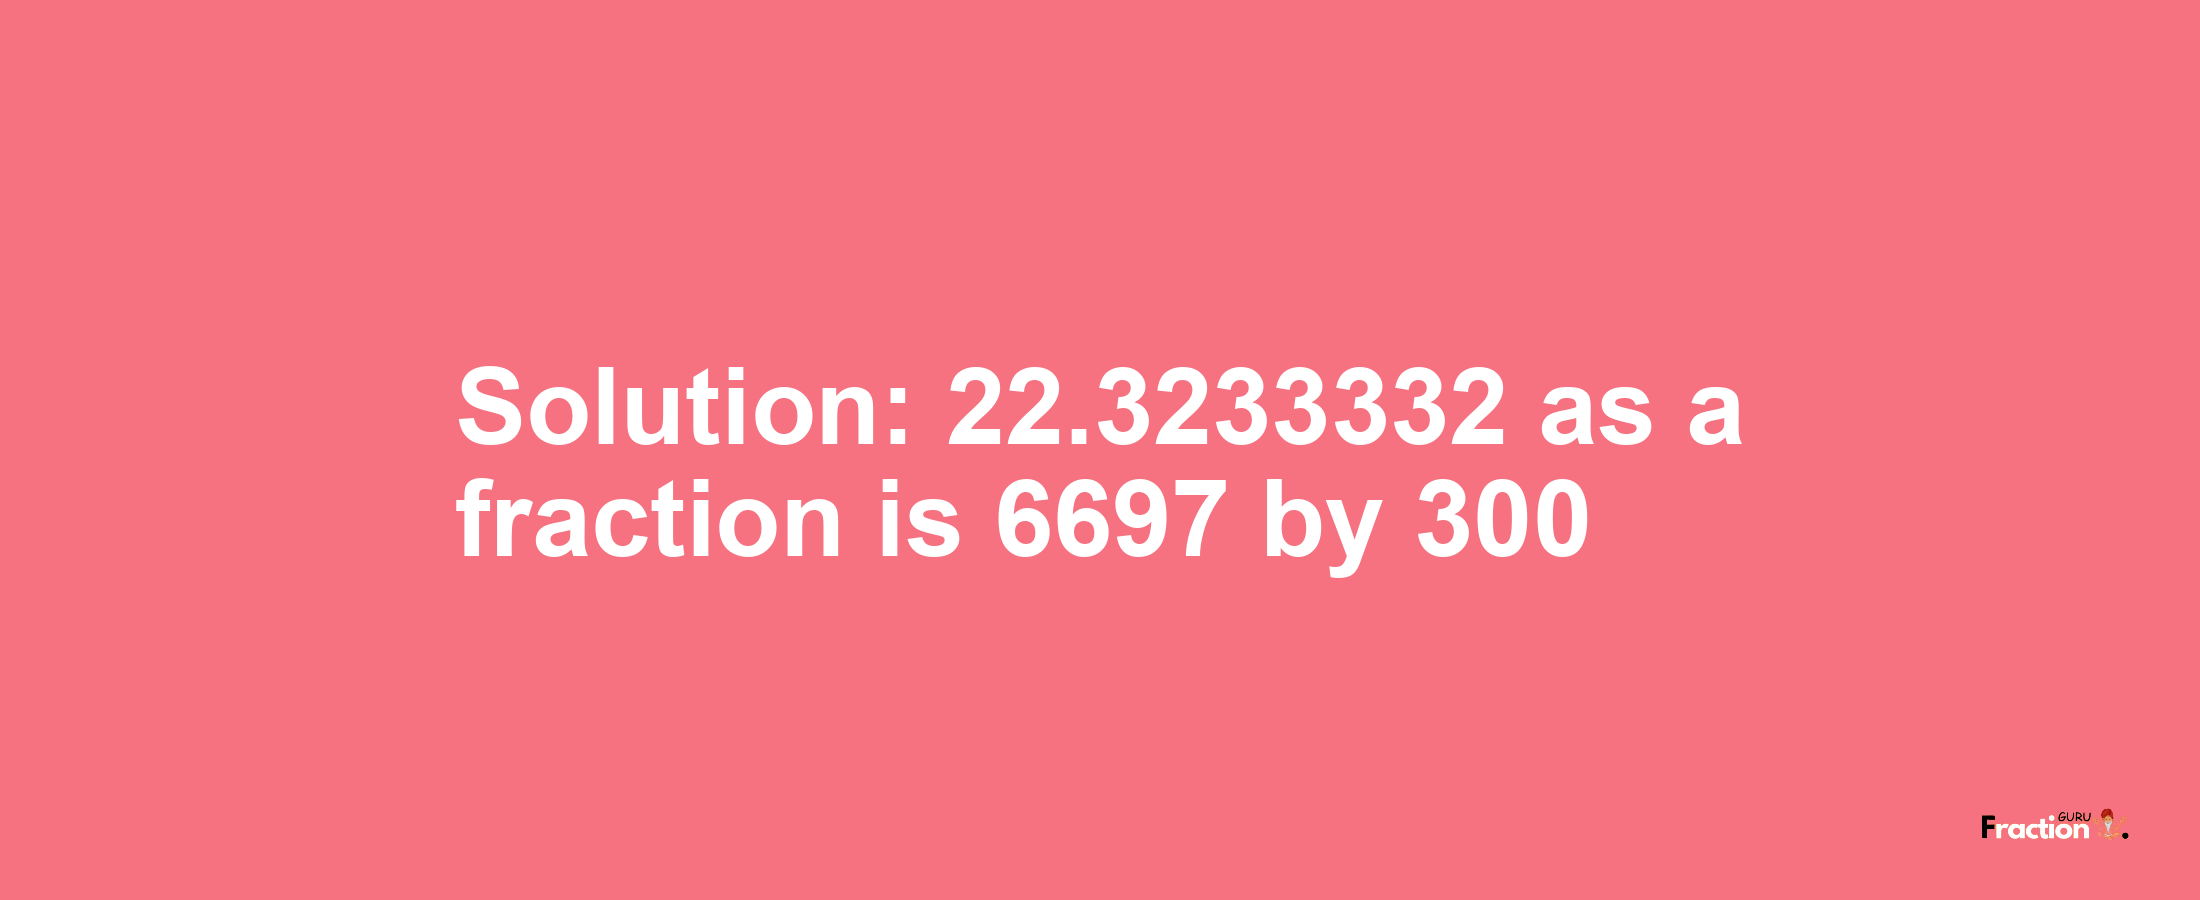 Solution:22.3233332 as a fraction is 6697/300